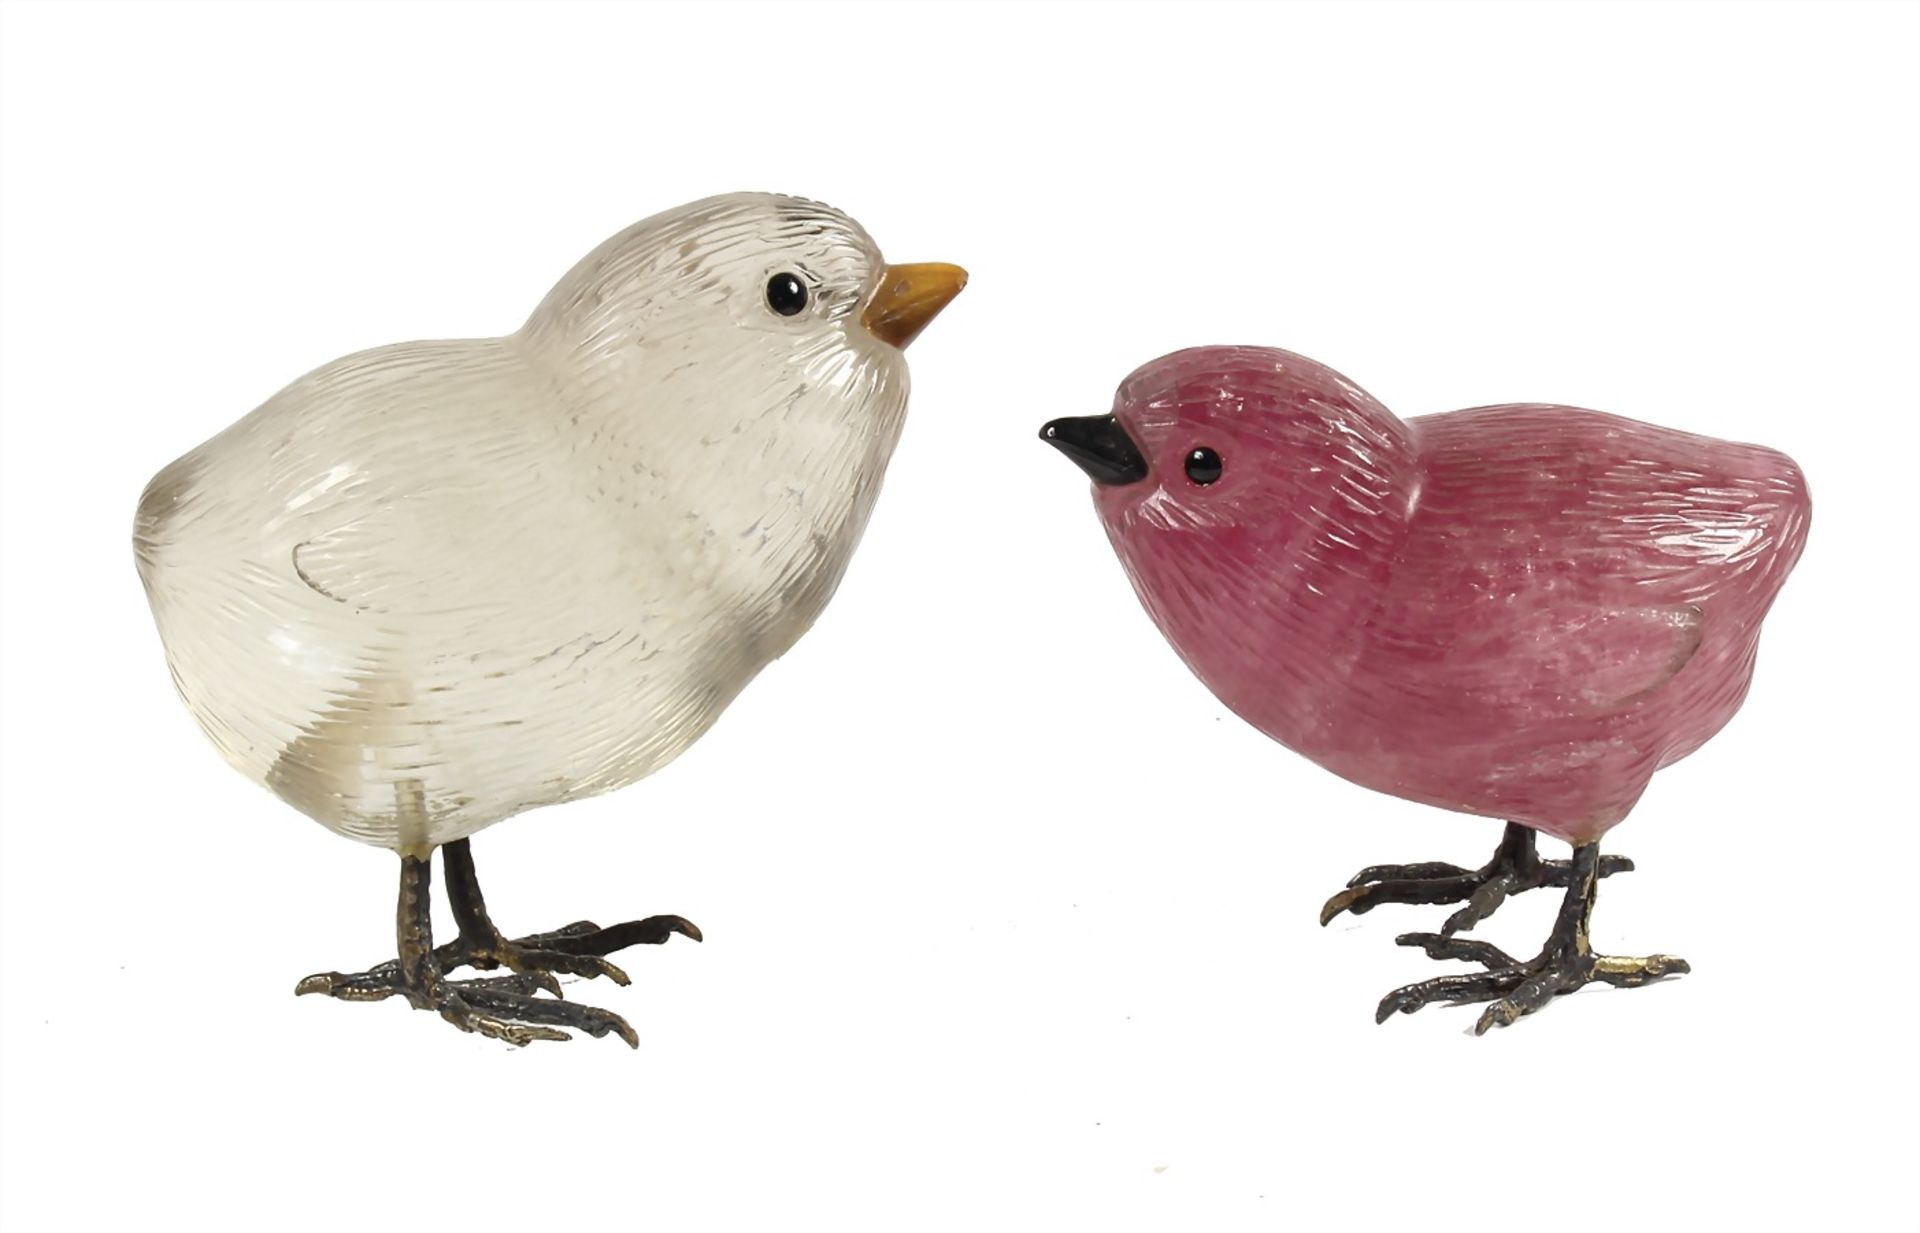 2 chicks, feet made of silver (checked), 1 chick, engraved pink tourmaline, eyes and mouth piece